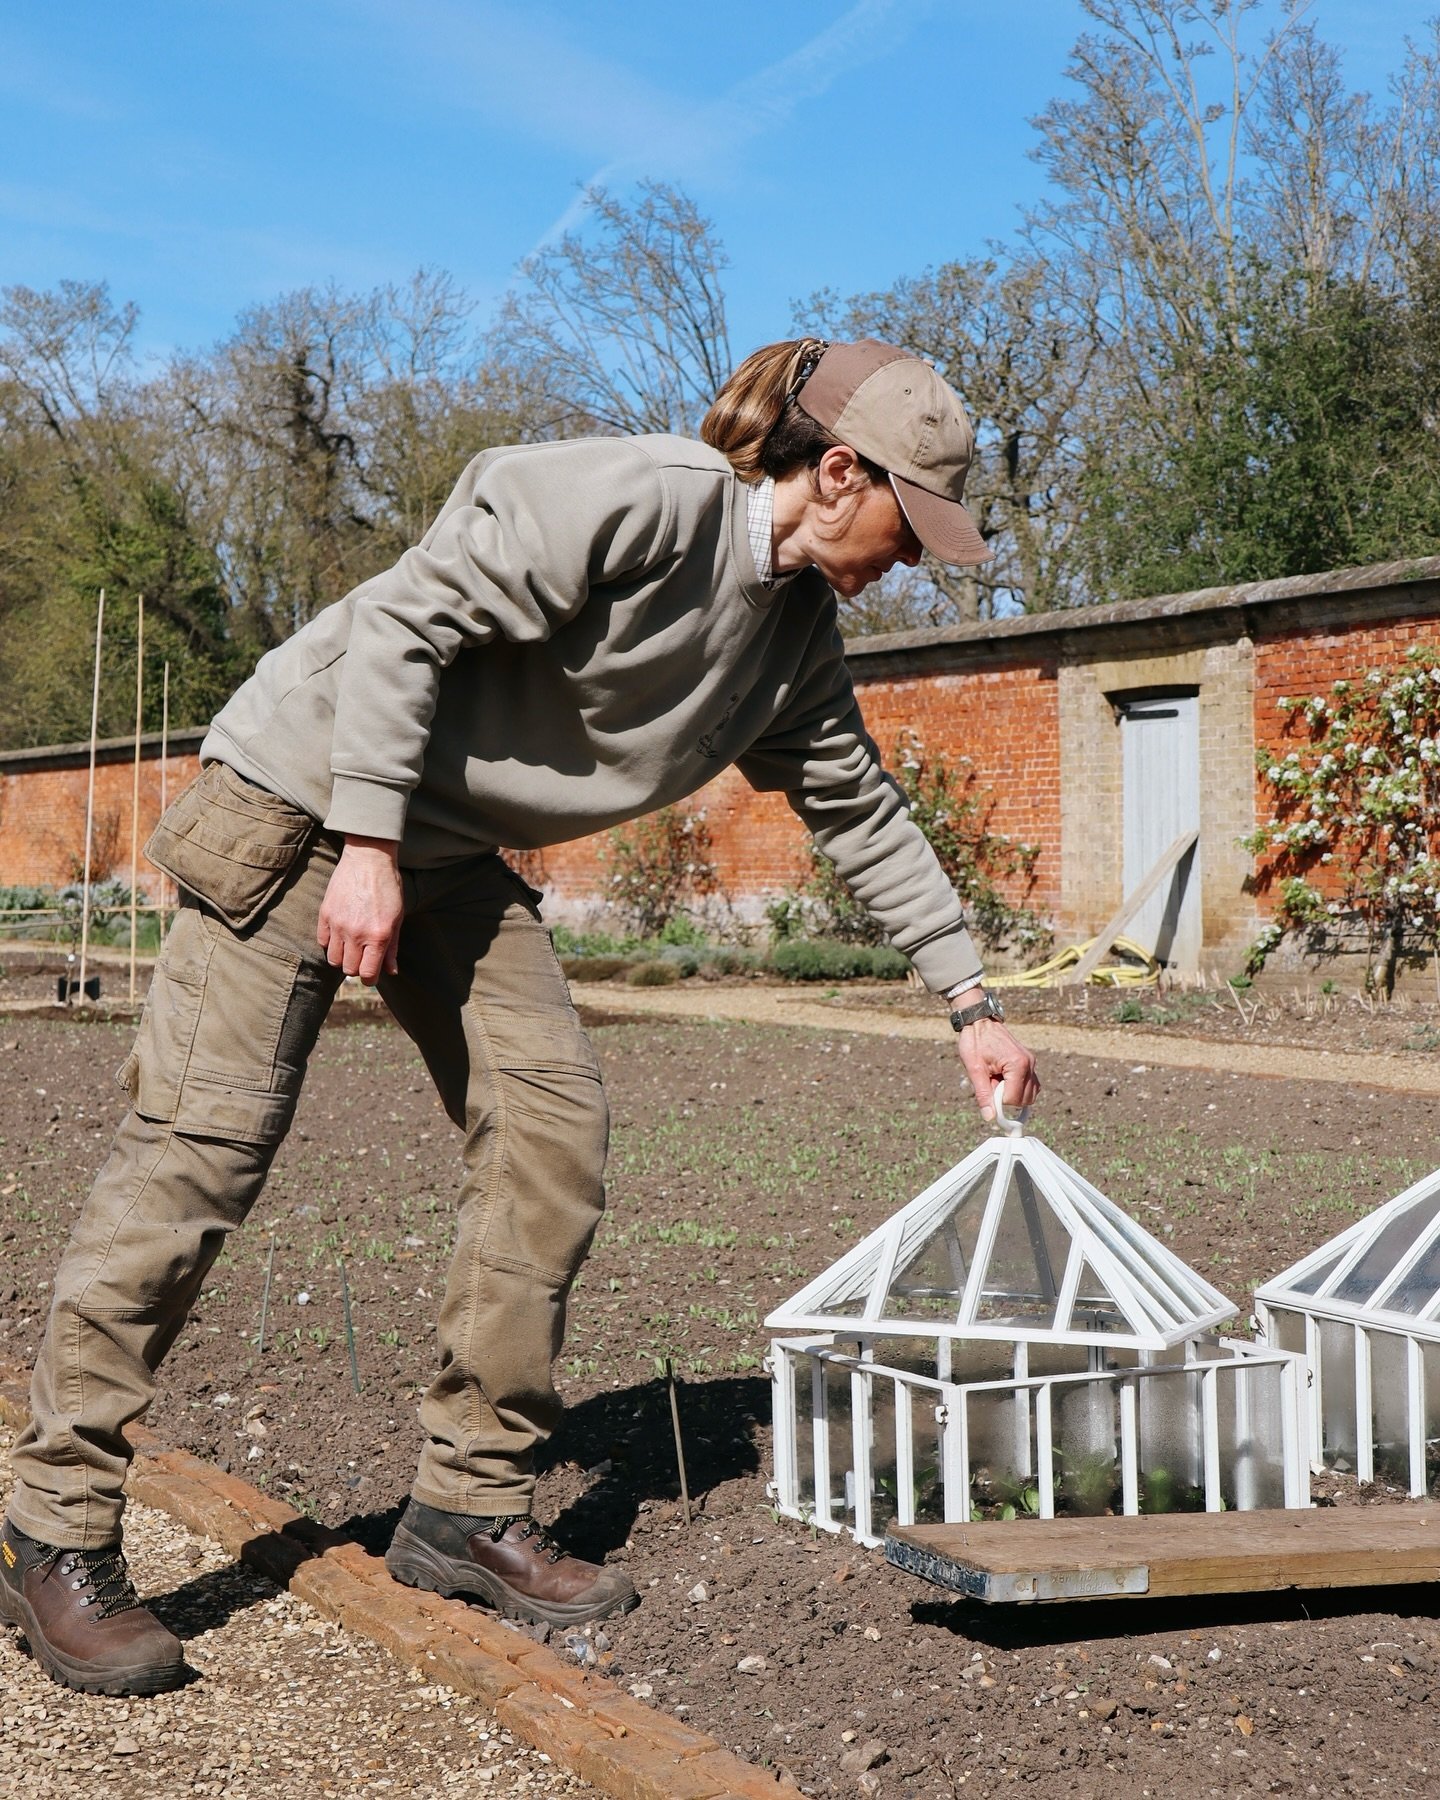 This week we travelled to East Anglia to visit some wonderful gardens, projects and plantspeople (more on that later). Whilst there, we caught up with @holkhamestate kitchen gardener Kirsty to learn more about how she uses cloches in the walled kitch